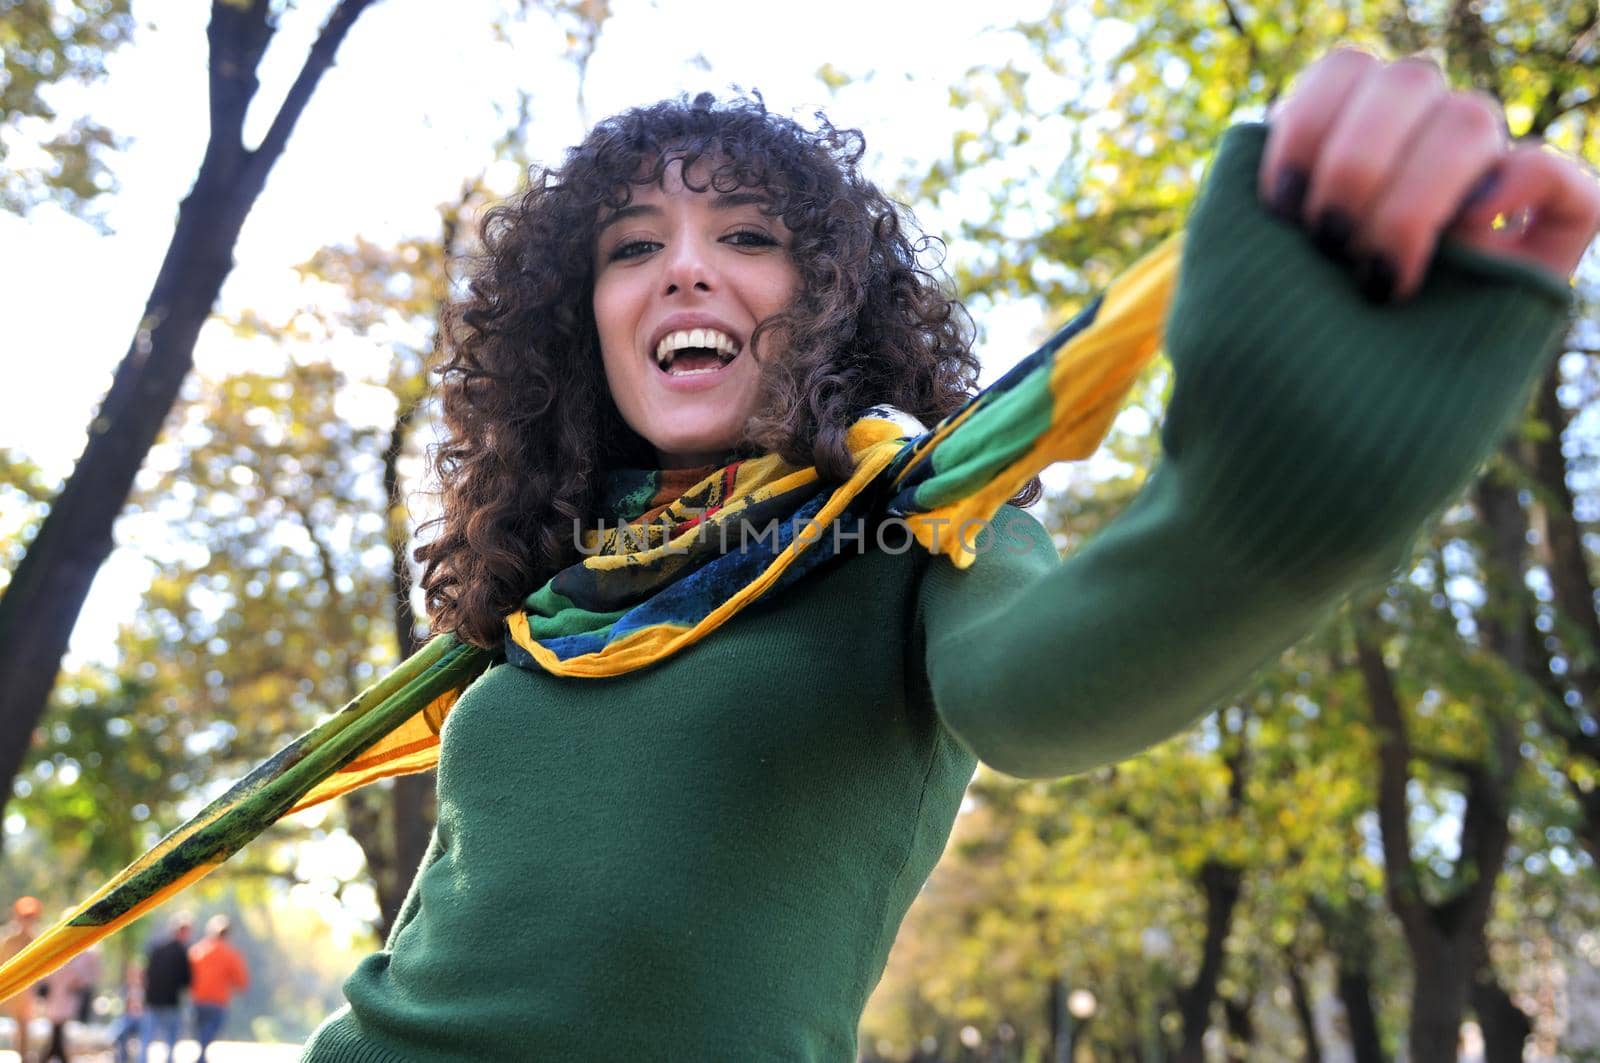 Young curly woman smiling outdoors in nature